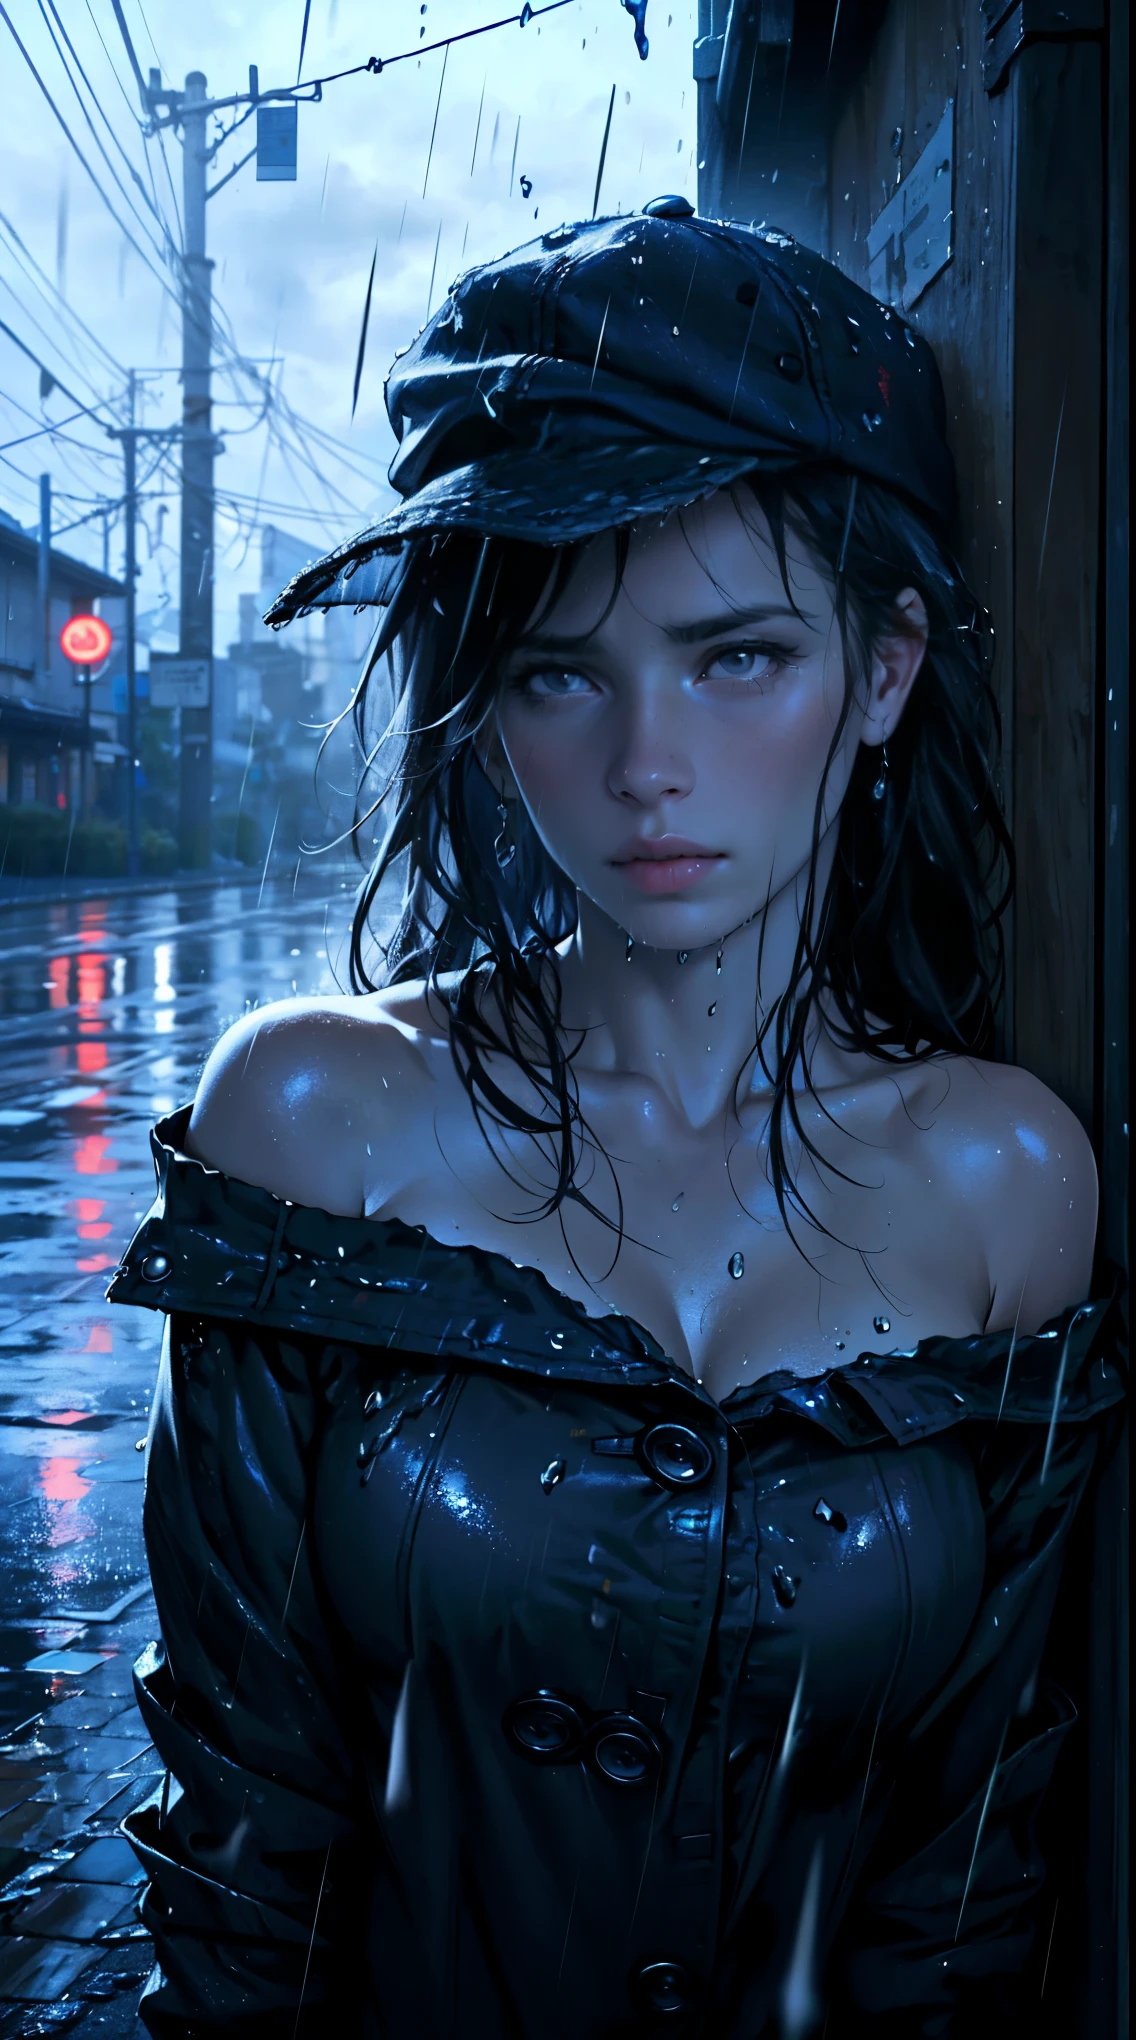 ( best quality,4k,8k,highres,masterpiece:1.2),ultra-detailed,(realistic,photorealistic,photo-realistic:1.37),rainy scene,stressed,outdoor,gloomy atmosphere,realistic droplets on the face,drenched clothes,dark colors,despair,desolation,loneliness,lost in thoughts,emotional,wet street,running mascara on his face,tears streaming down his cheeks,hat soaked with rain,water dripping from his hair,hunched shoulders,visible sadness,pouring rain,thunderstorm,tempestuous weather,misery,deep sorrow,heartache,negative emotions,despairing expression,cold and wet,paleness,heavy rain falling,wet pavement,teardrops falling rapidly,solitude,devastation.